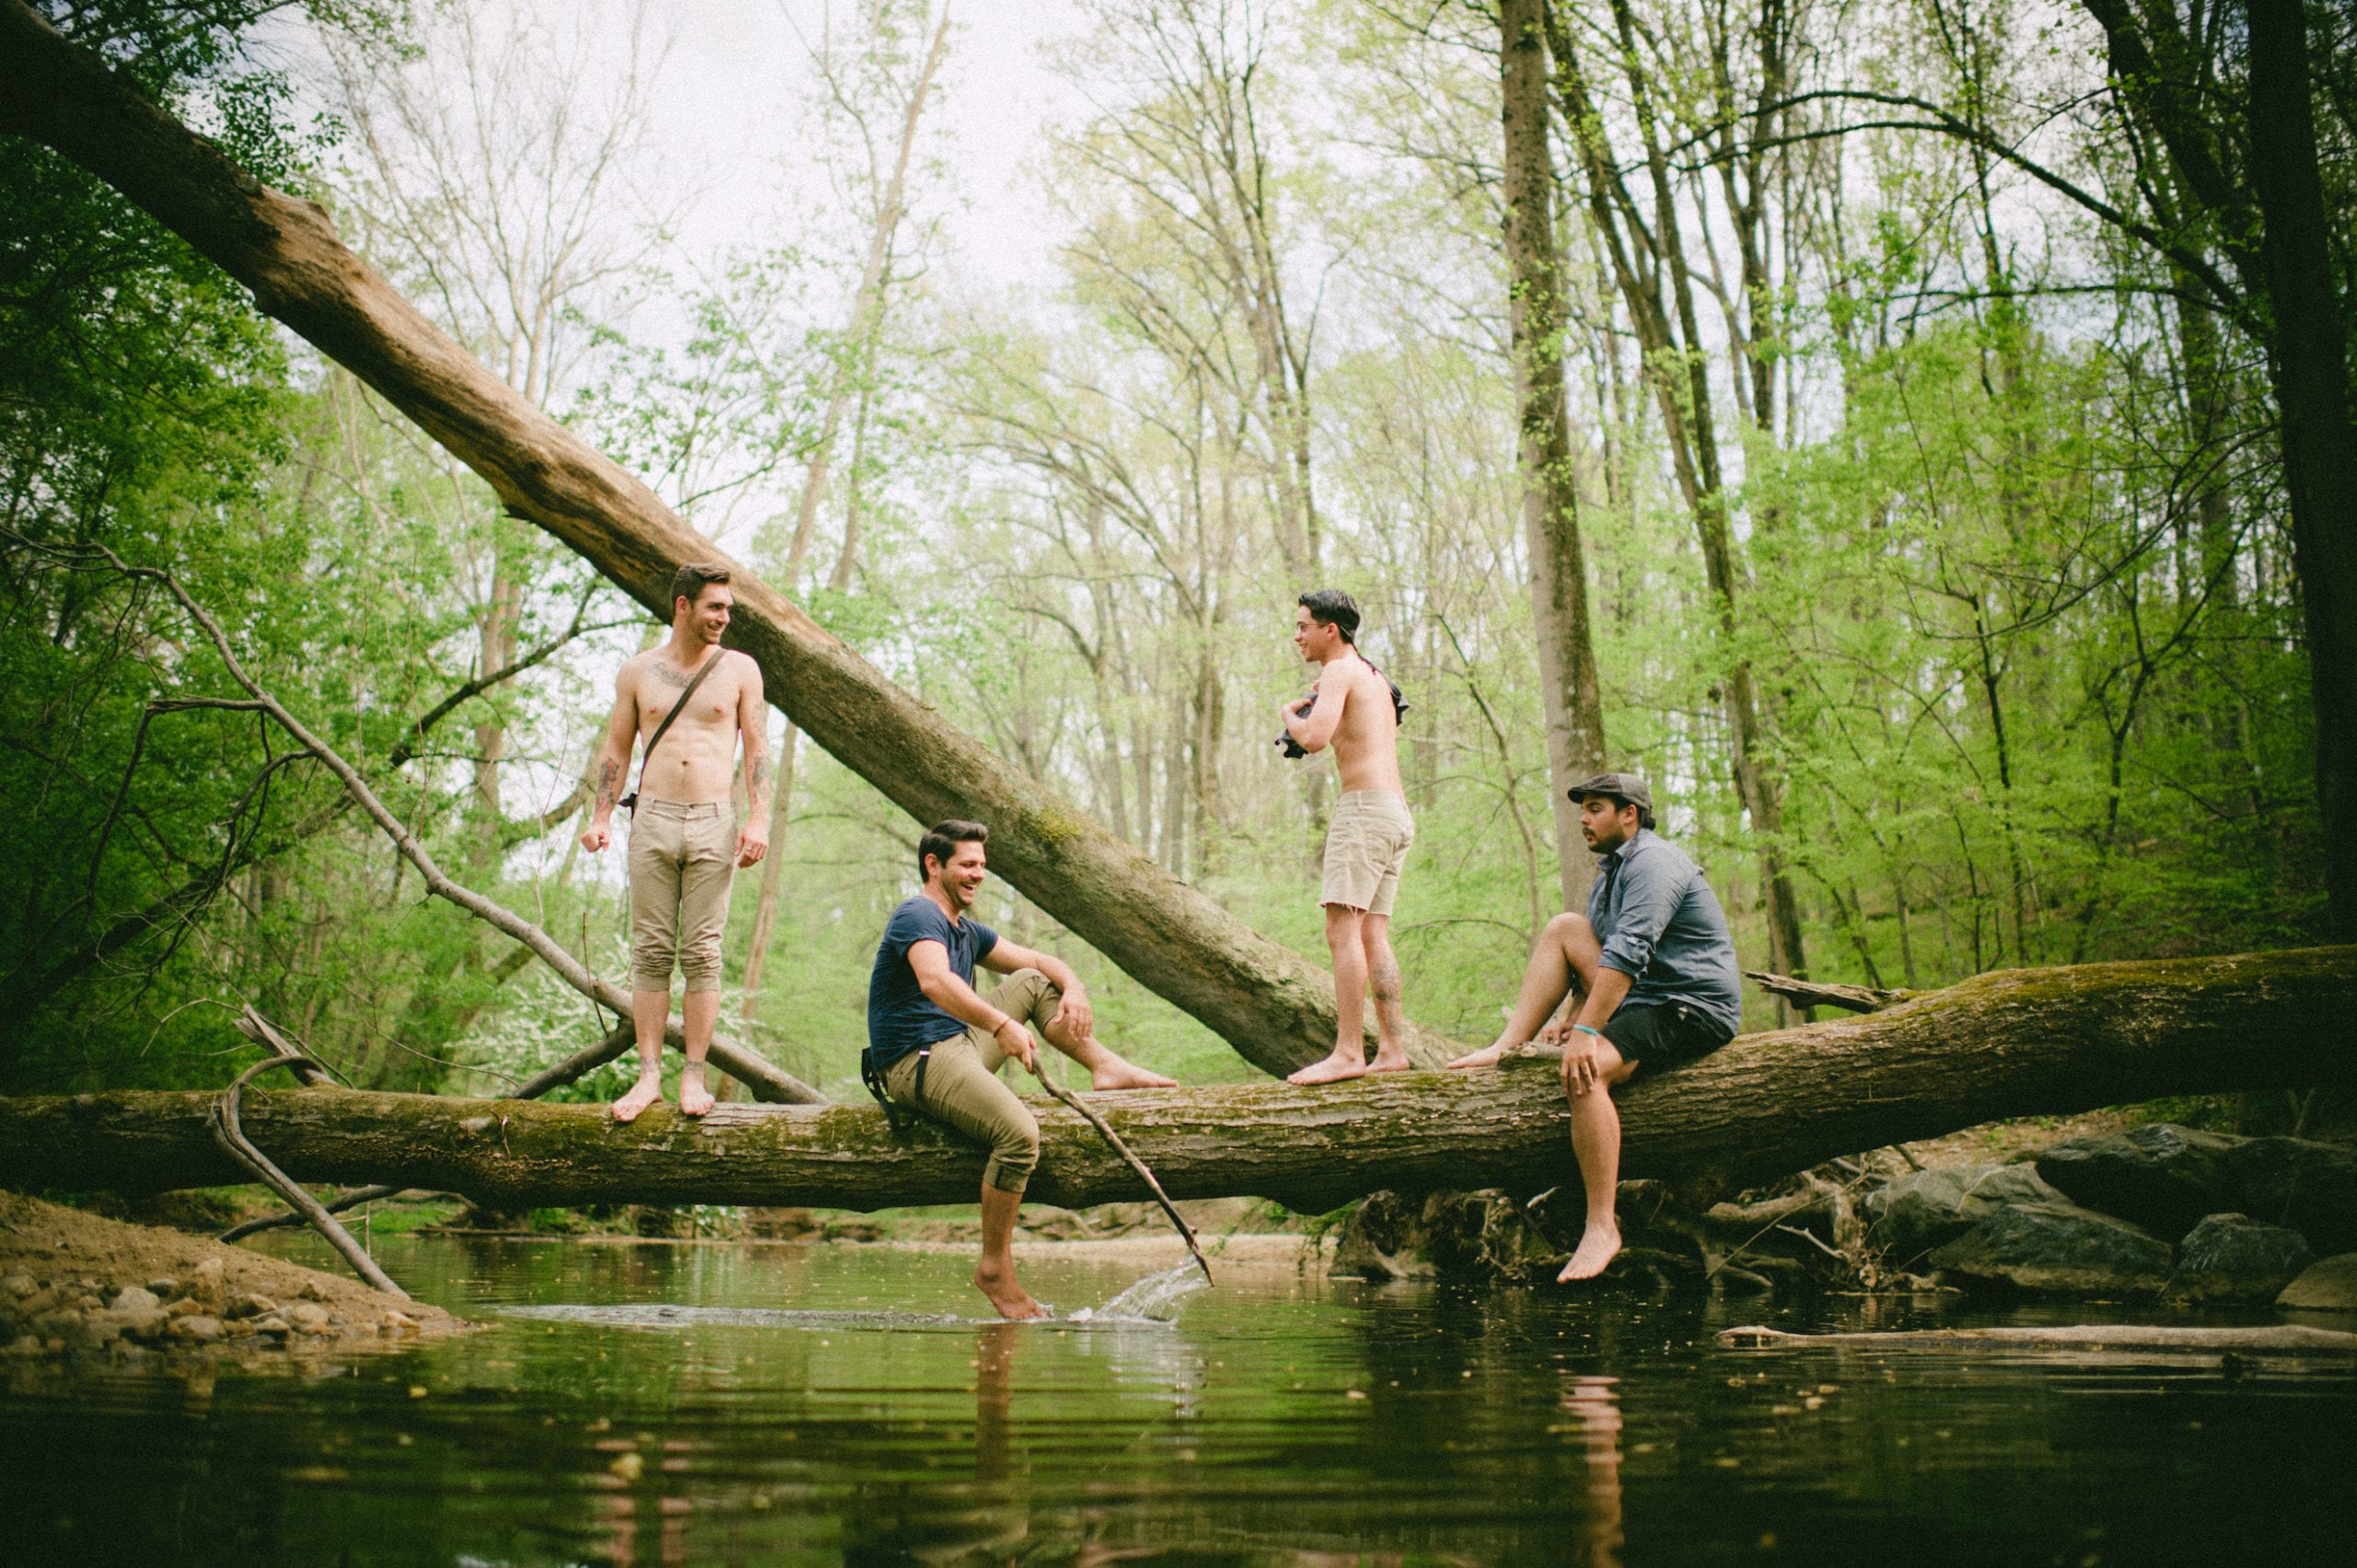 Kids American Indie Rock Band Four men in the forest by a creek. Two are shirtless and are standing on a log and two are sitting sideways on a log facing each other with one holding a stick.